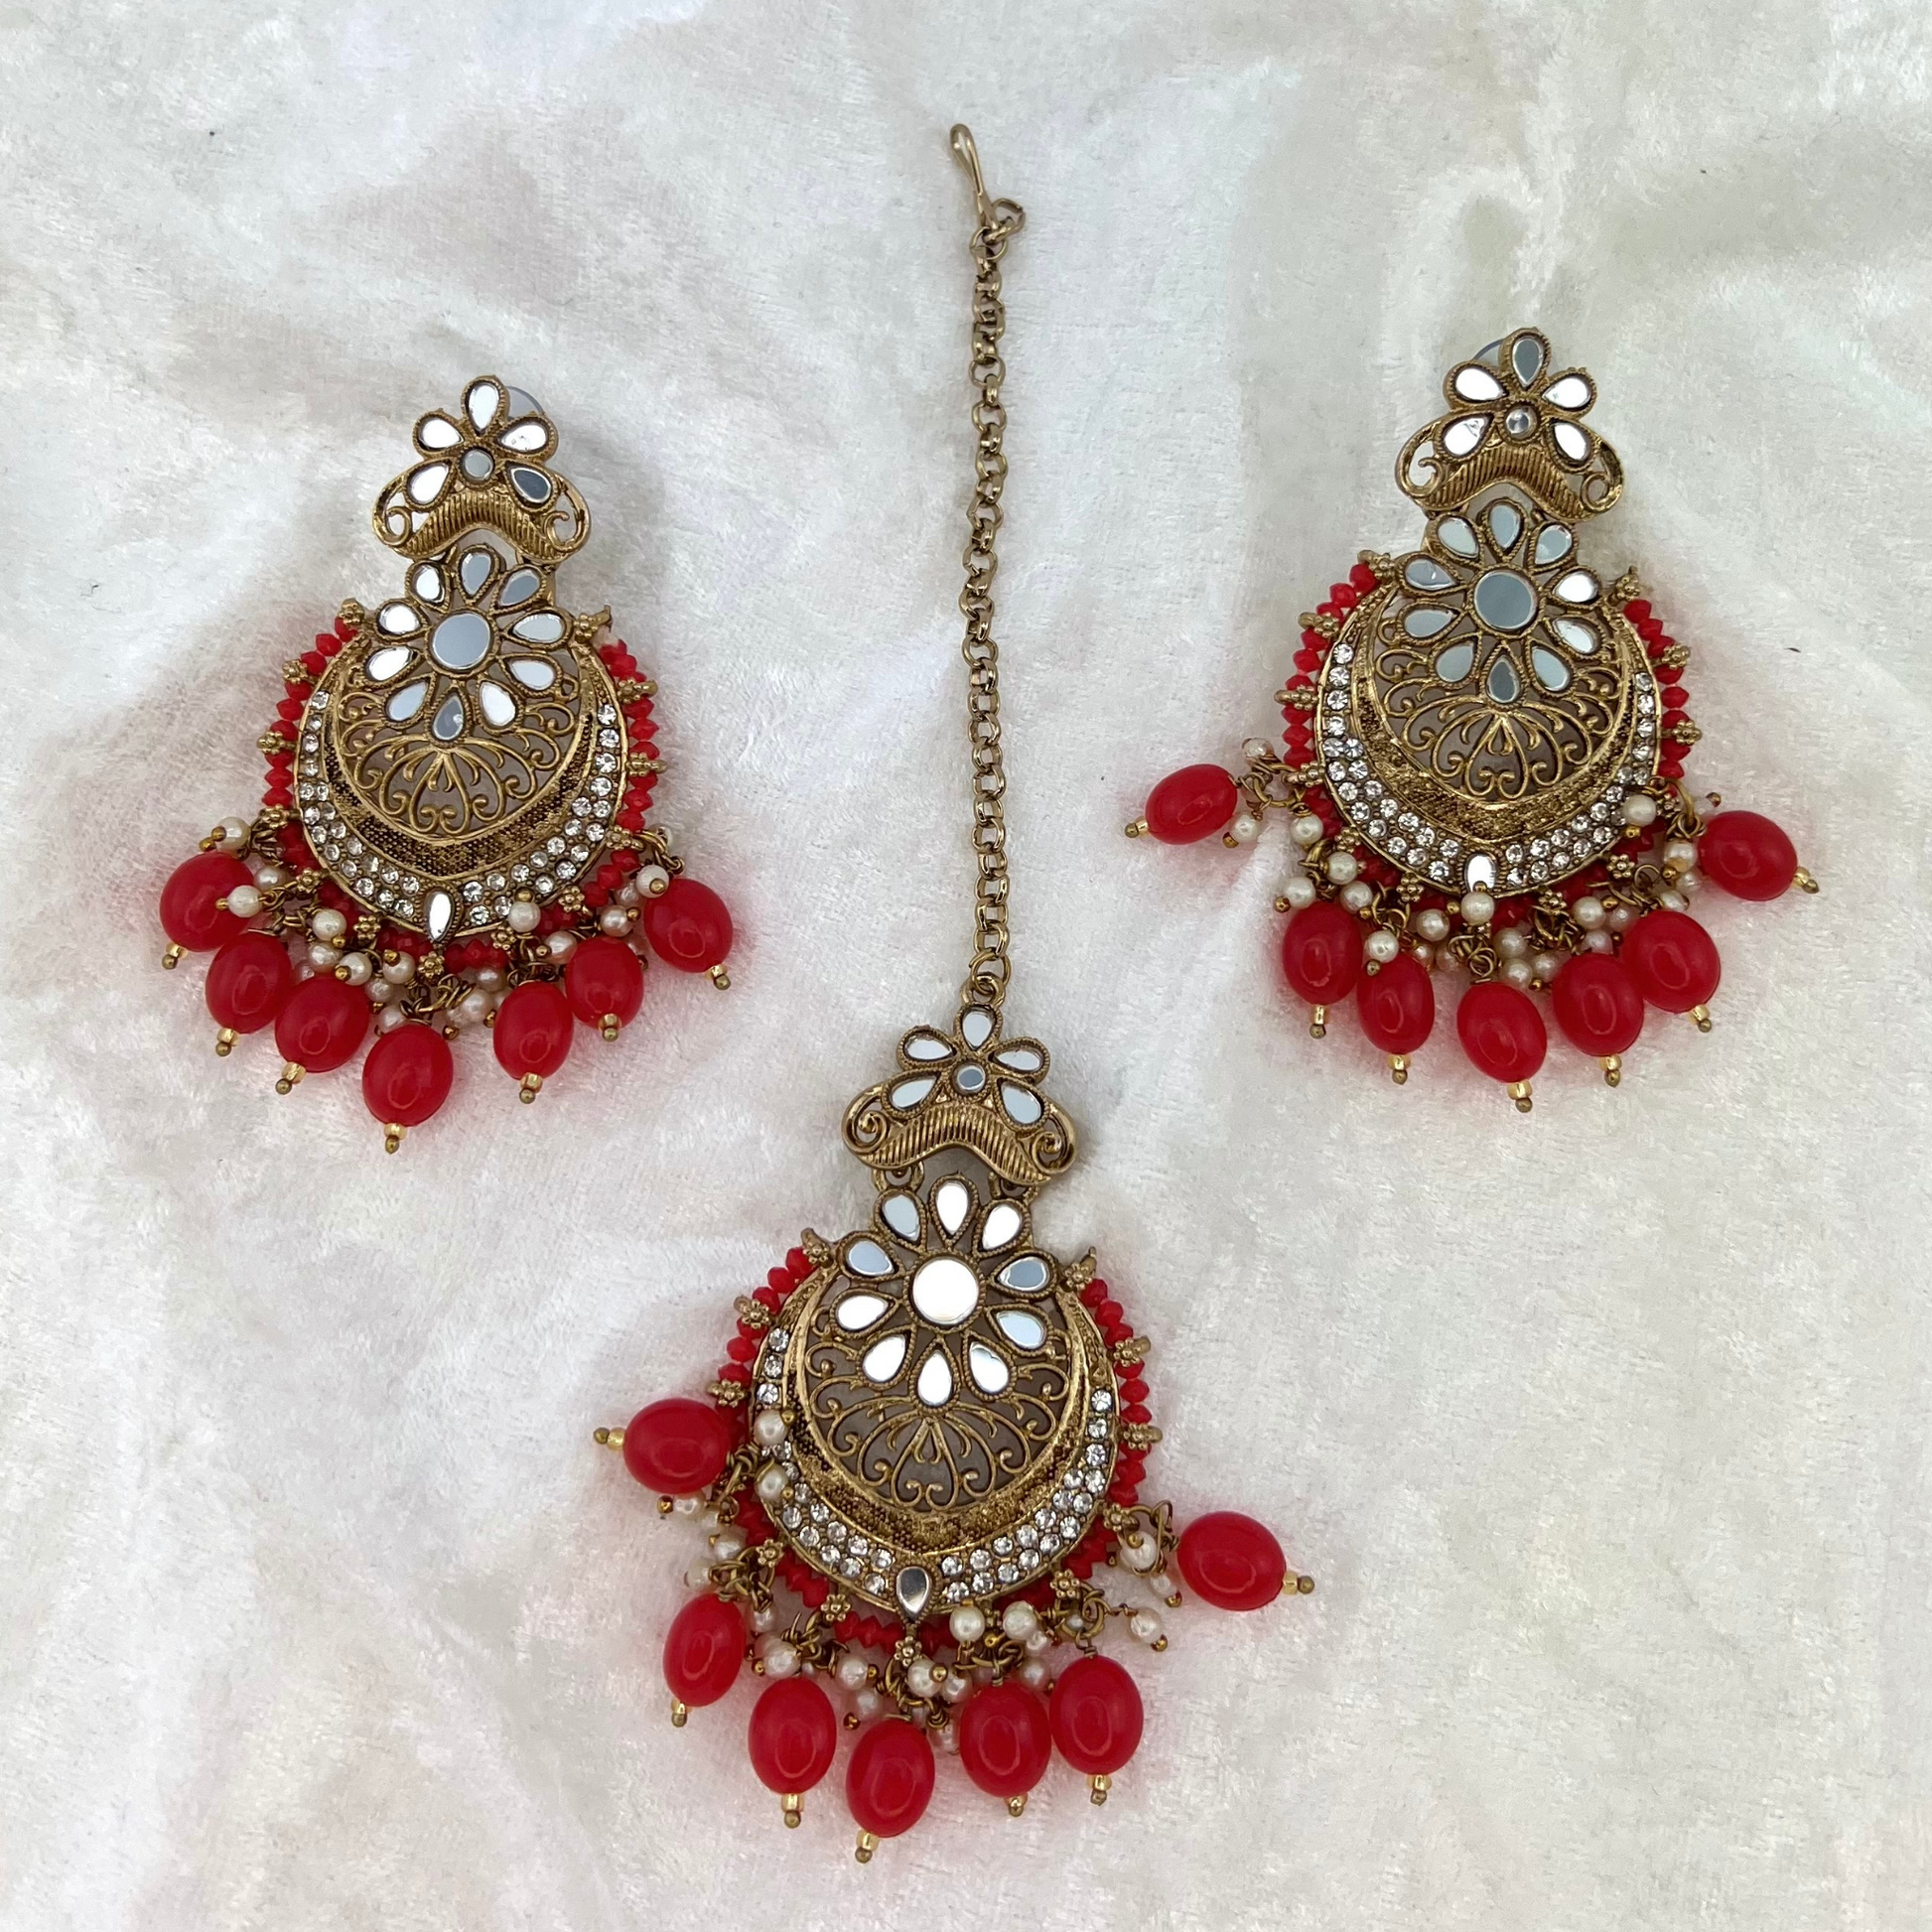 Mirror Tikka & Earring set in Red, high quality stones and beads